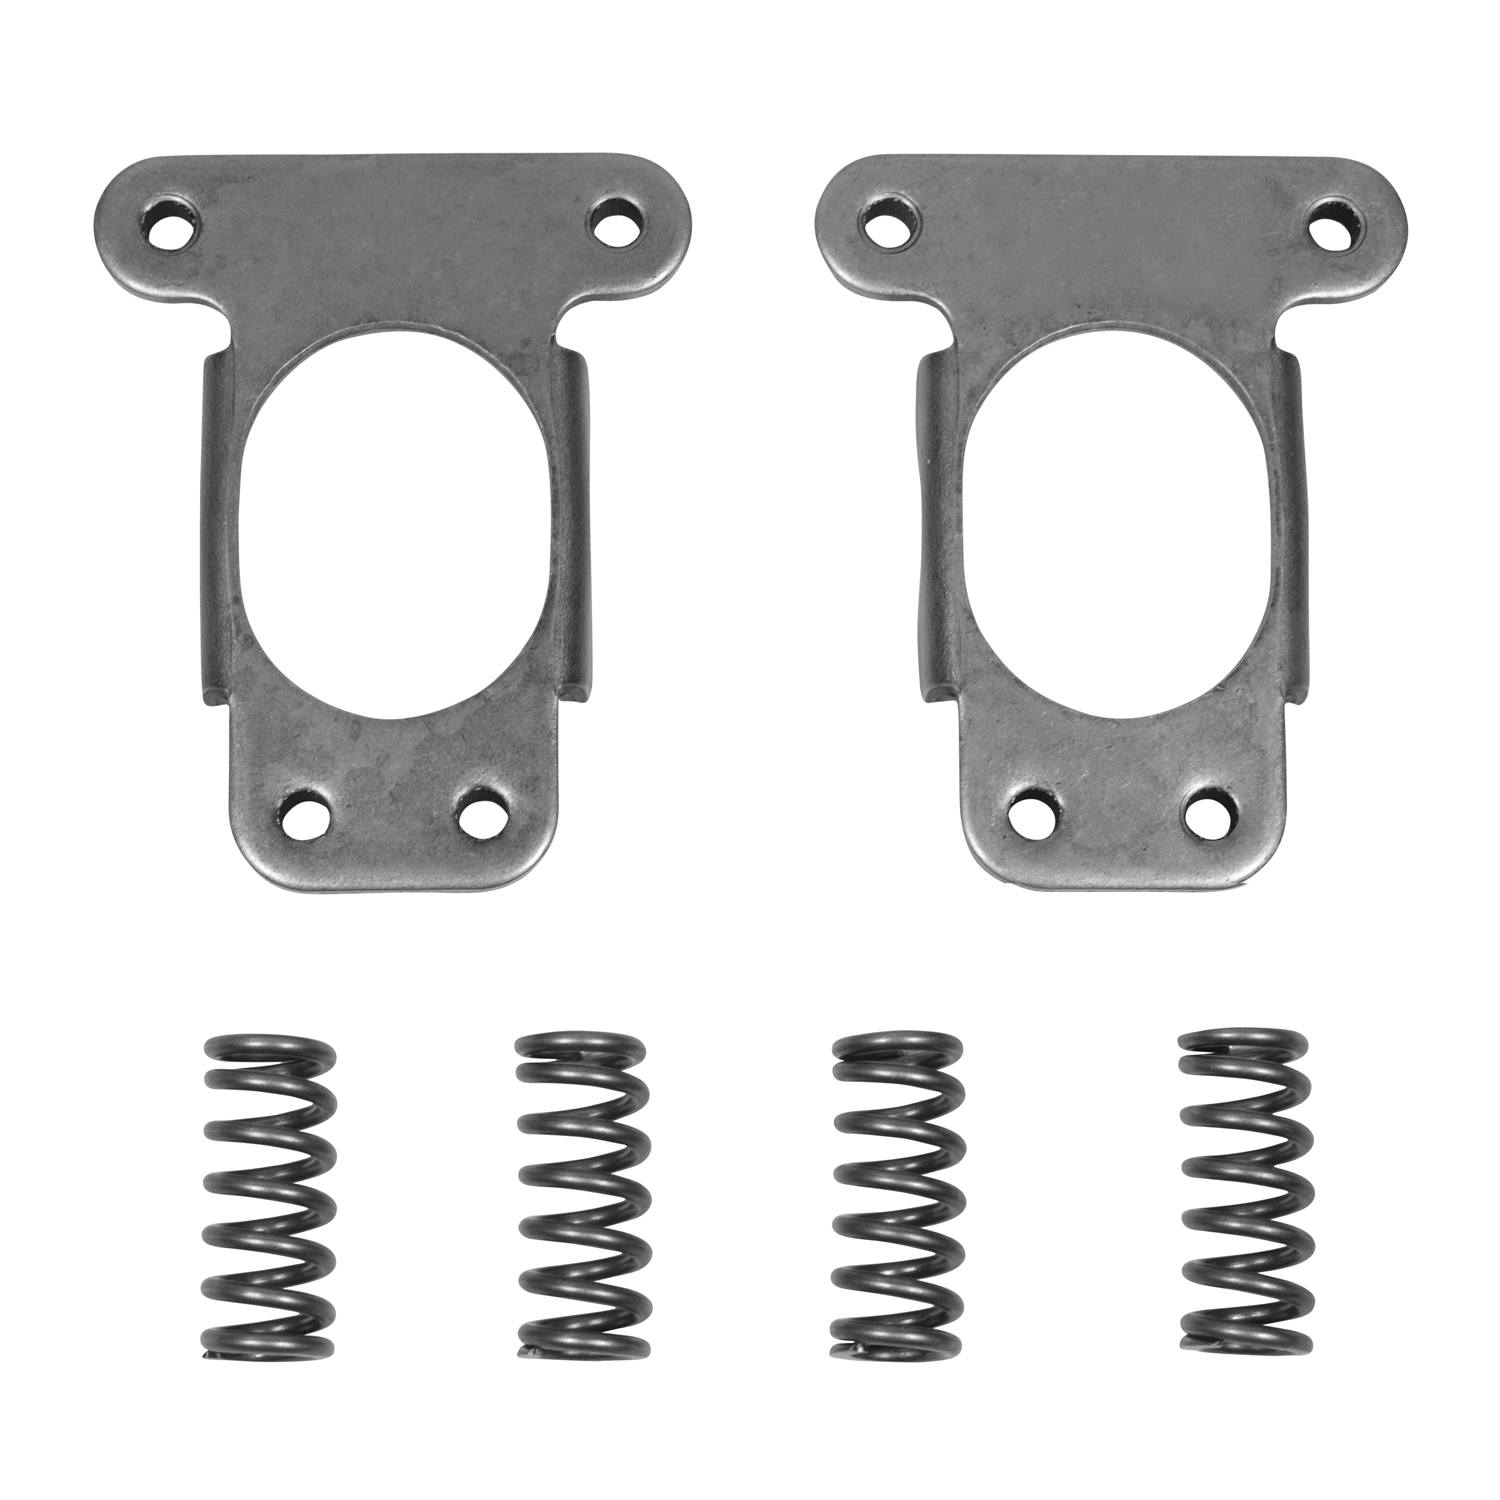 Posi spring kit for GM 7.5", with preload plates 